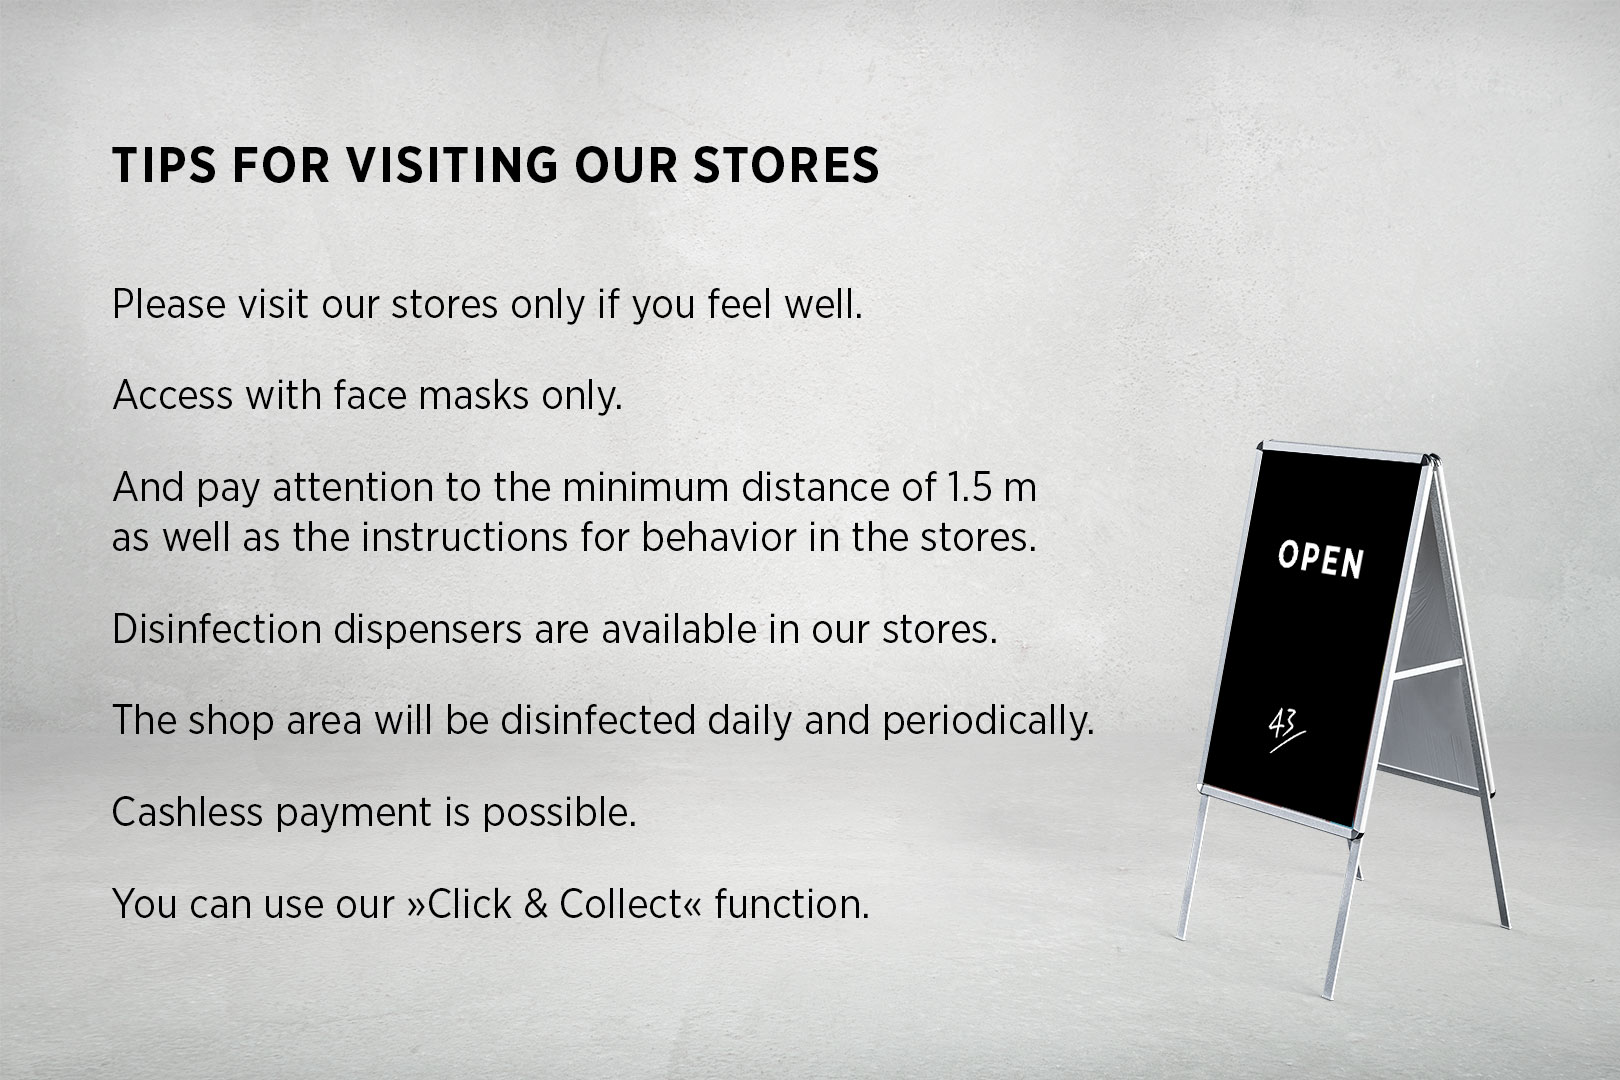 Tips for visiting our stores